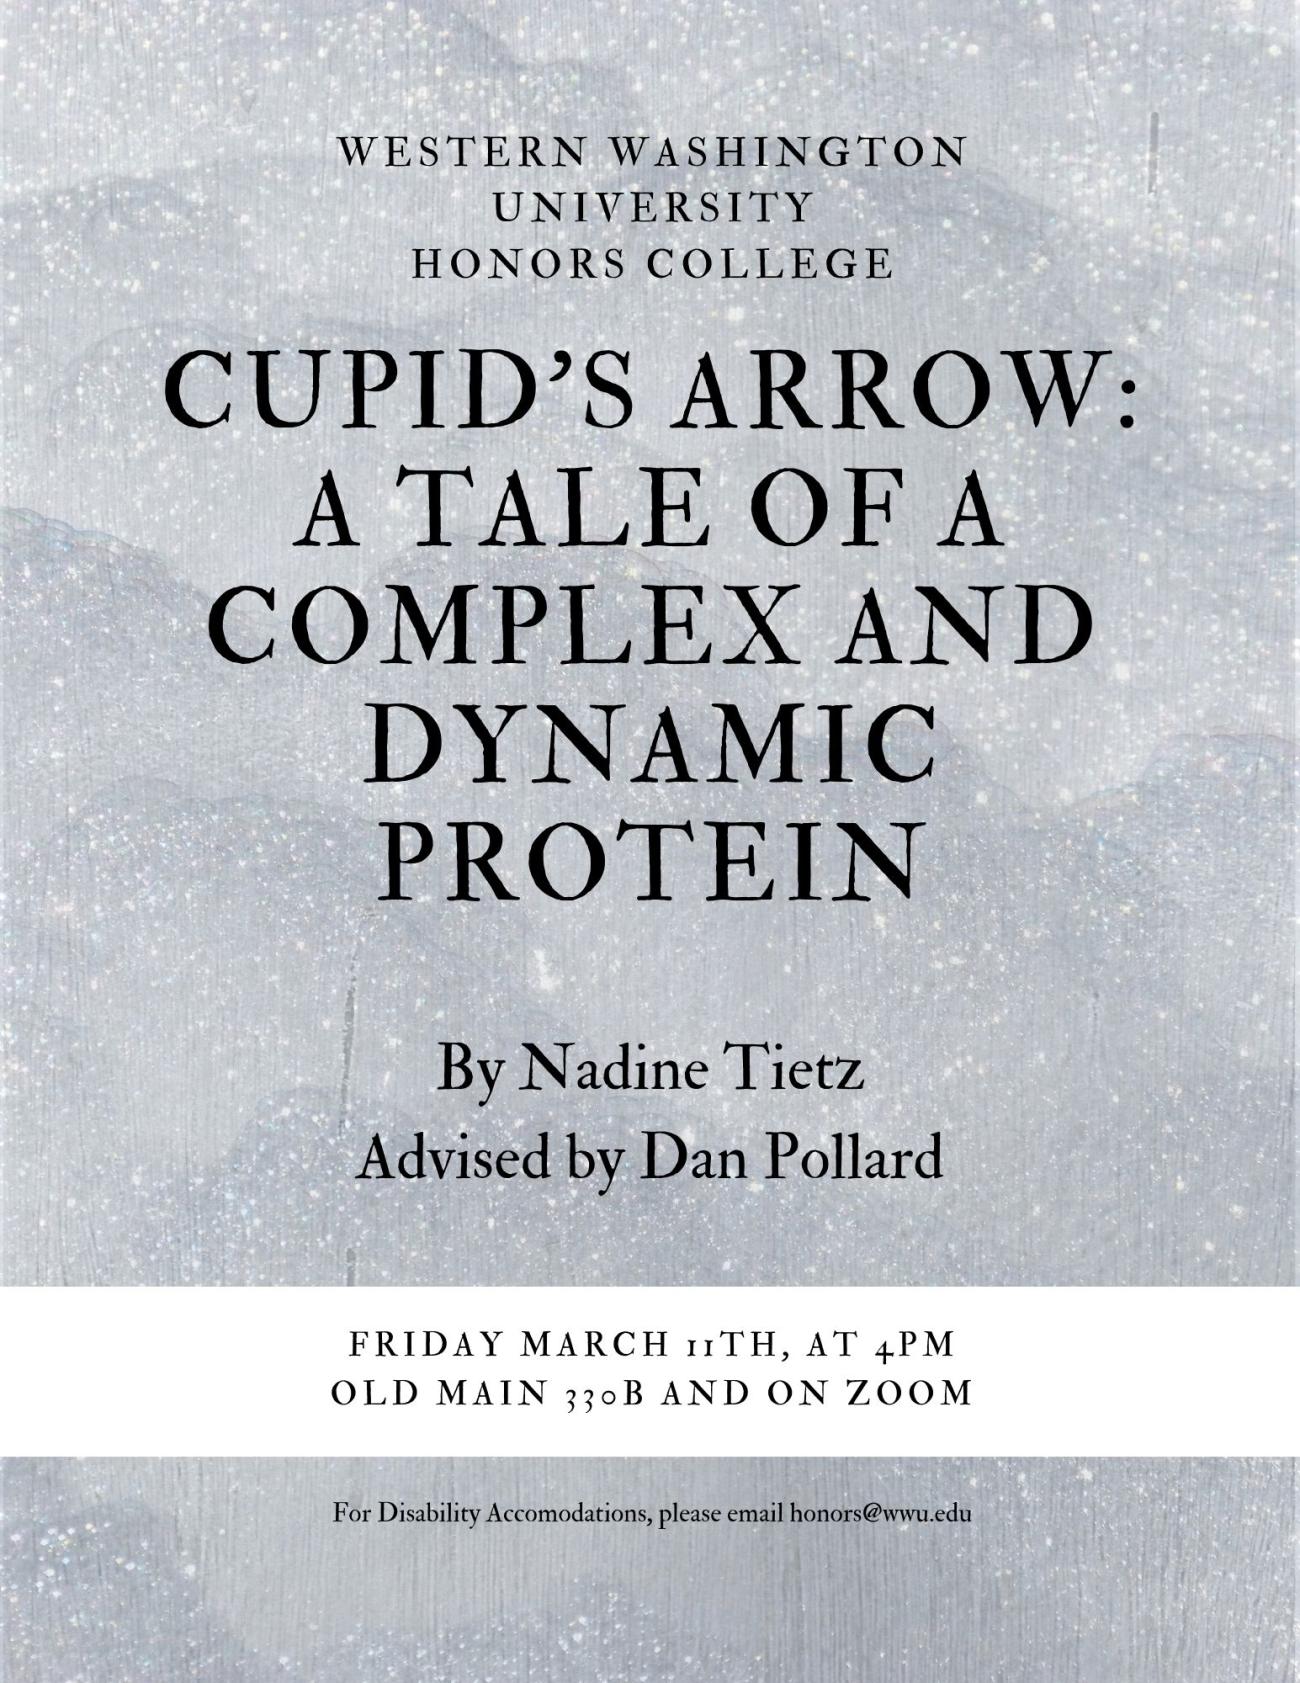 A grey poster with text that reads: "Western Washington University Honors College. Cupid's Arrow: A Tale of a Complex and Dynamic Protein. By Nadine Tietz. Advised by Dan Pollard. Friday, March 11th at 4 PM in Old Main 330B and on zoom. For disability accommodations, please email honors@wwu.edu."